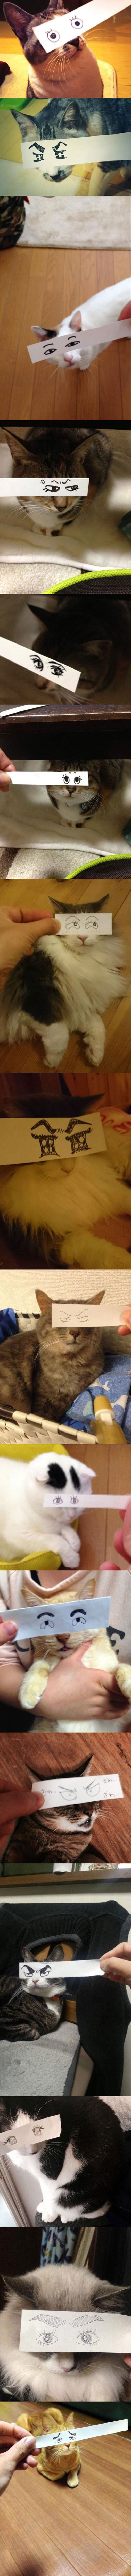 cool-cats-draw-eyes-paper